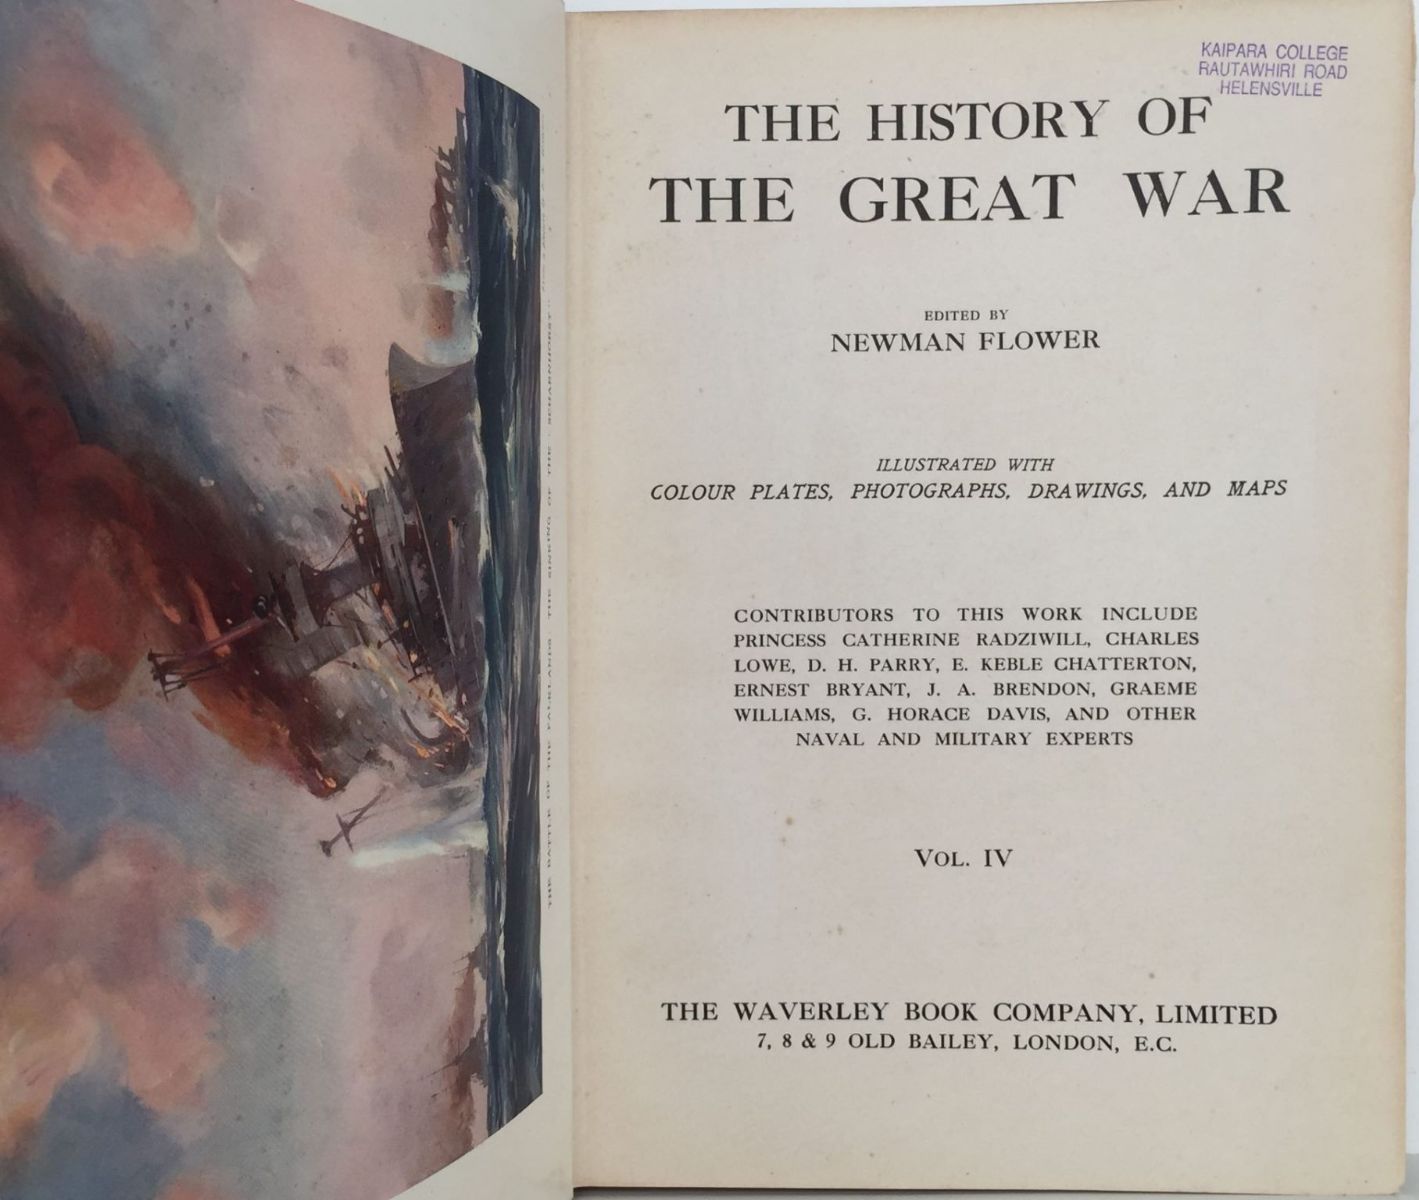 THE HISTORY OF THE GREAT WAR: Vol IV